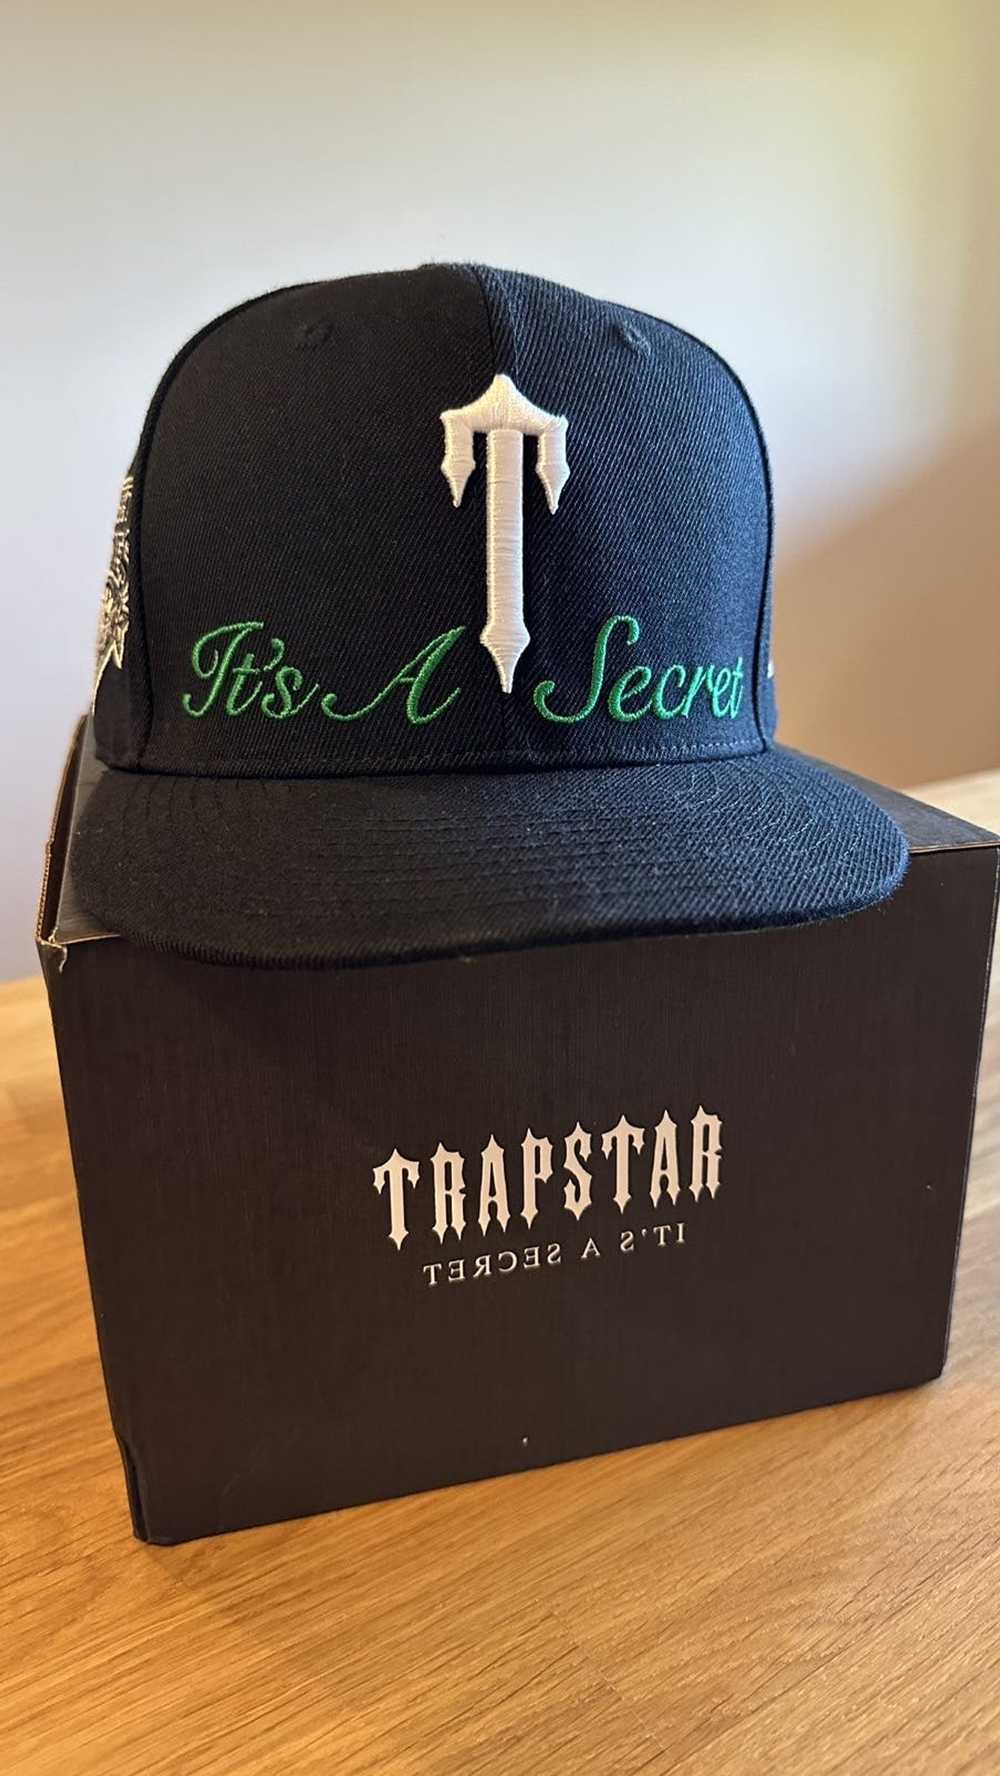 Trapstar London Trapstar fitted hat It's a secret… - image 2